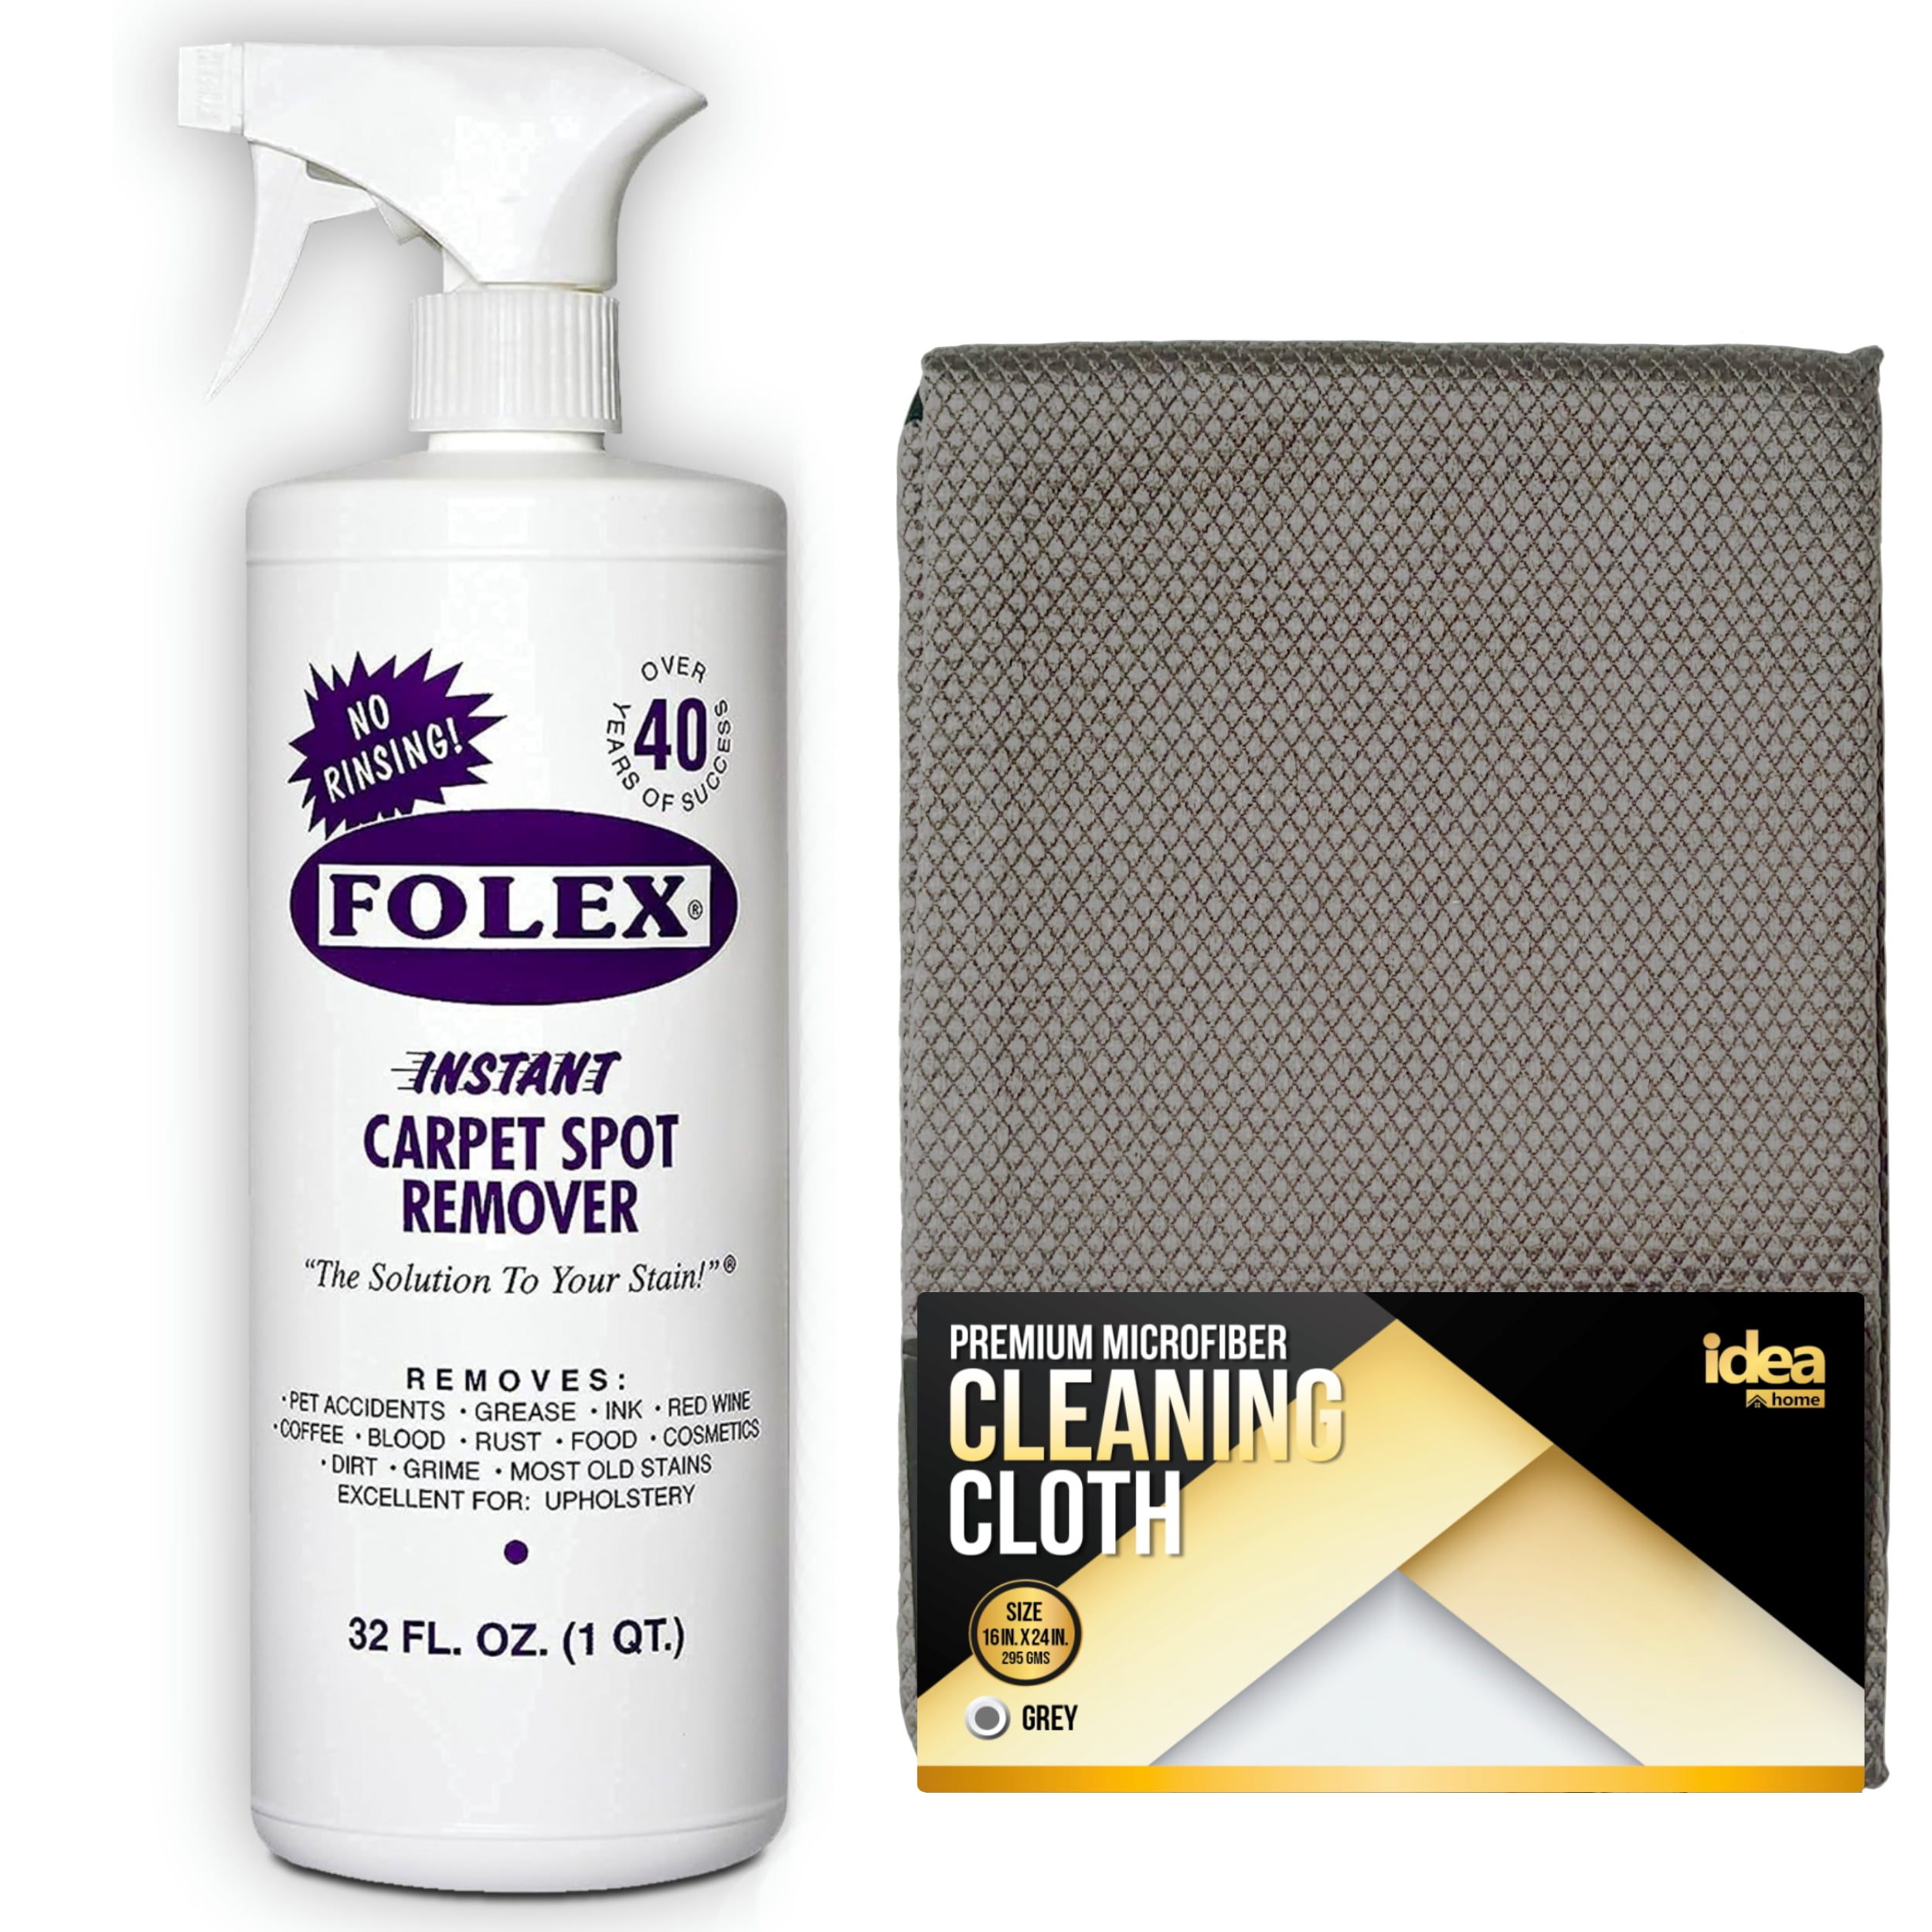 Goo Gone Grout & Tile Cleaner - Stain Remover - 14 fl. oz.